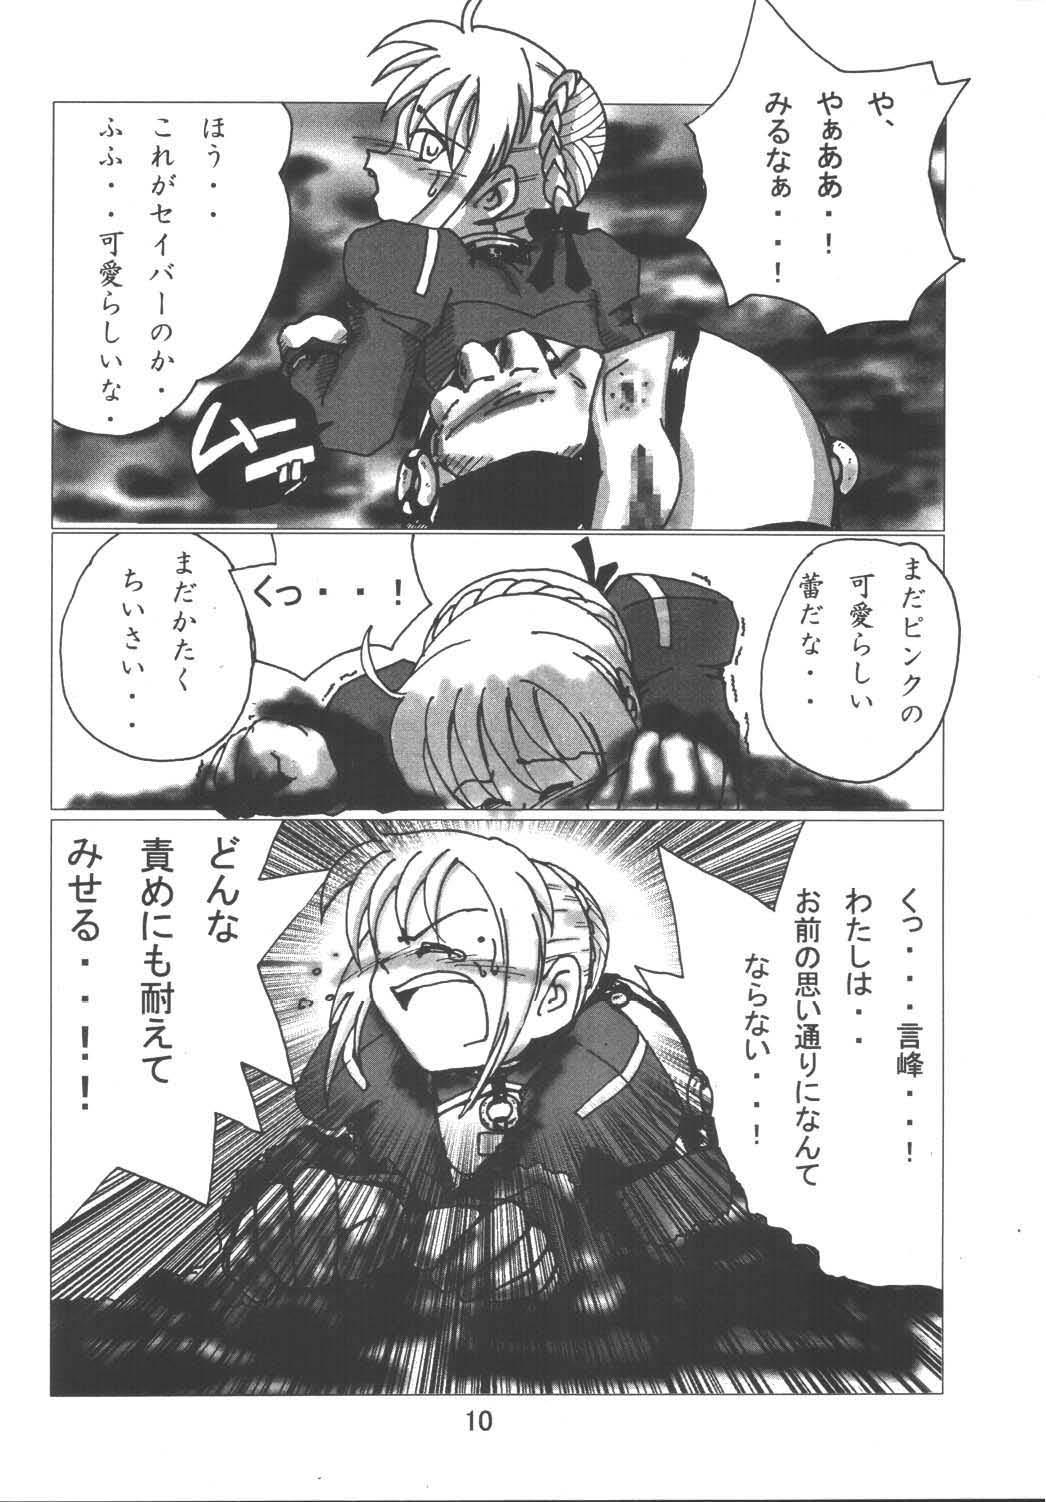 Shaven Fate Nightmare For Saber - Fate stay night First - Page 10